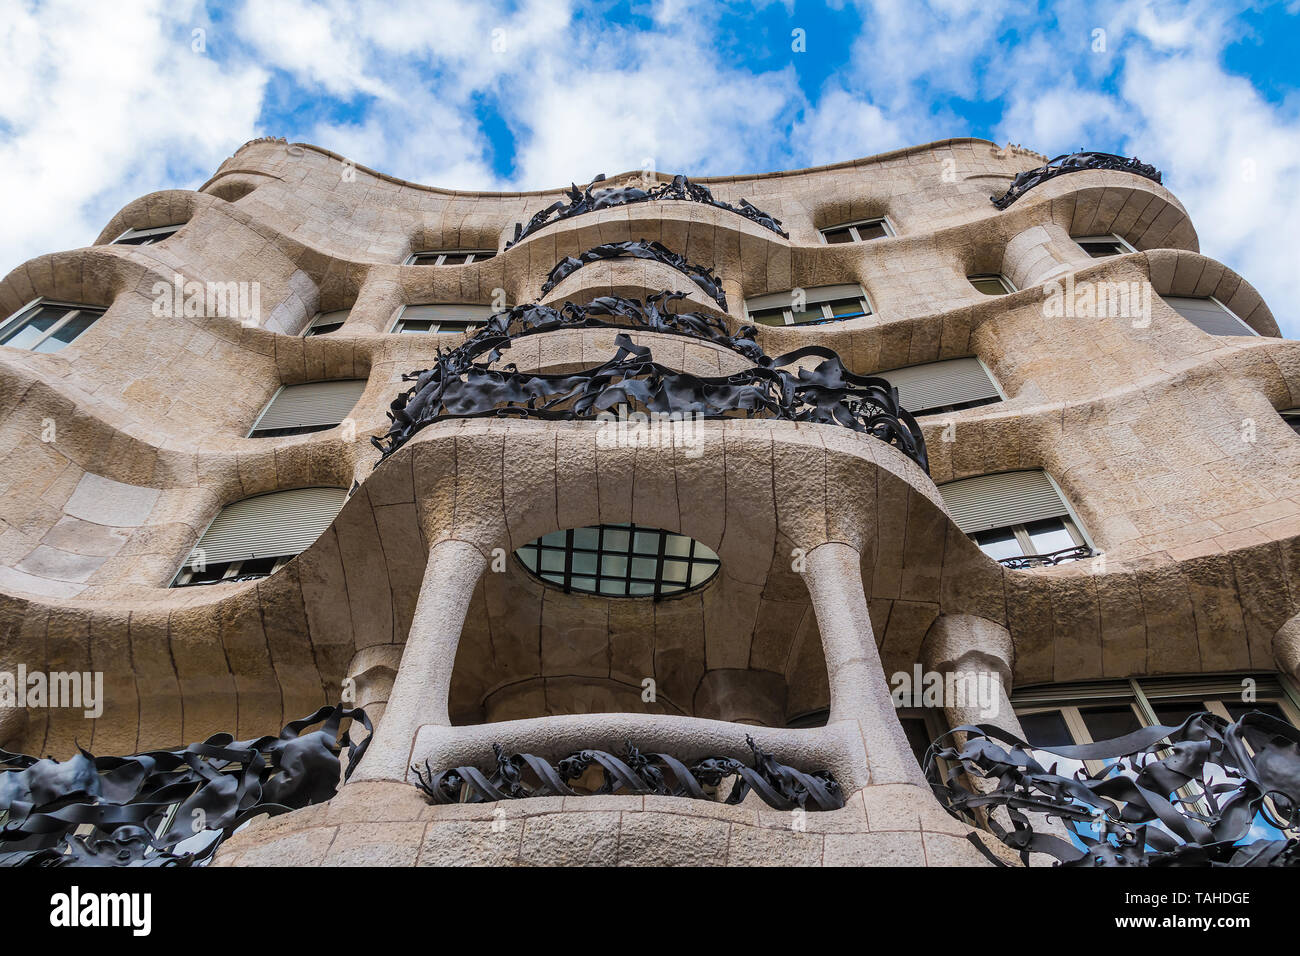 Barcelona, Catalonia, Spain - November 19, 2018: Worm's-eye view of Casa Mila on the background of cloudy sky. The building designed by Antonio Gaudi  Stock Photo